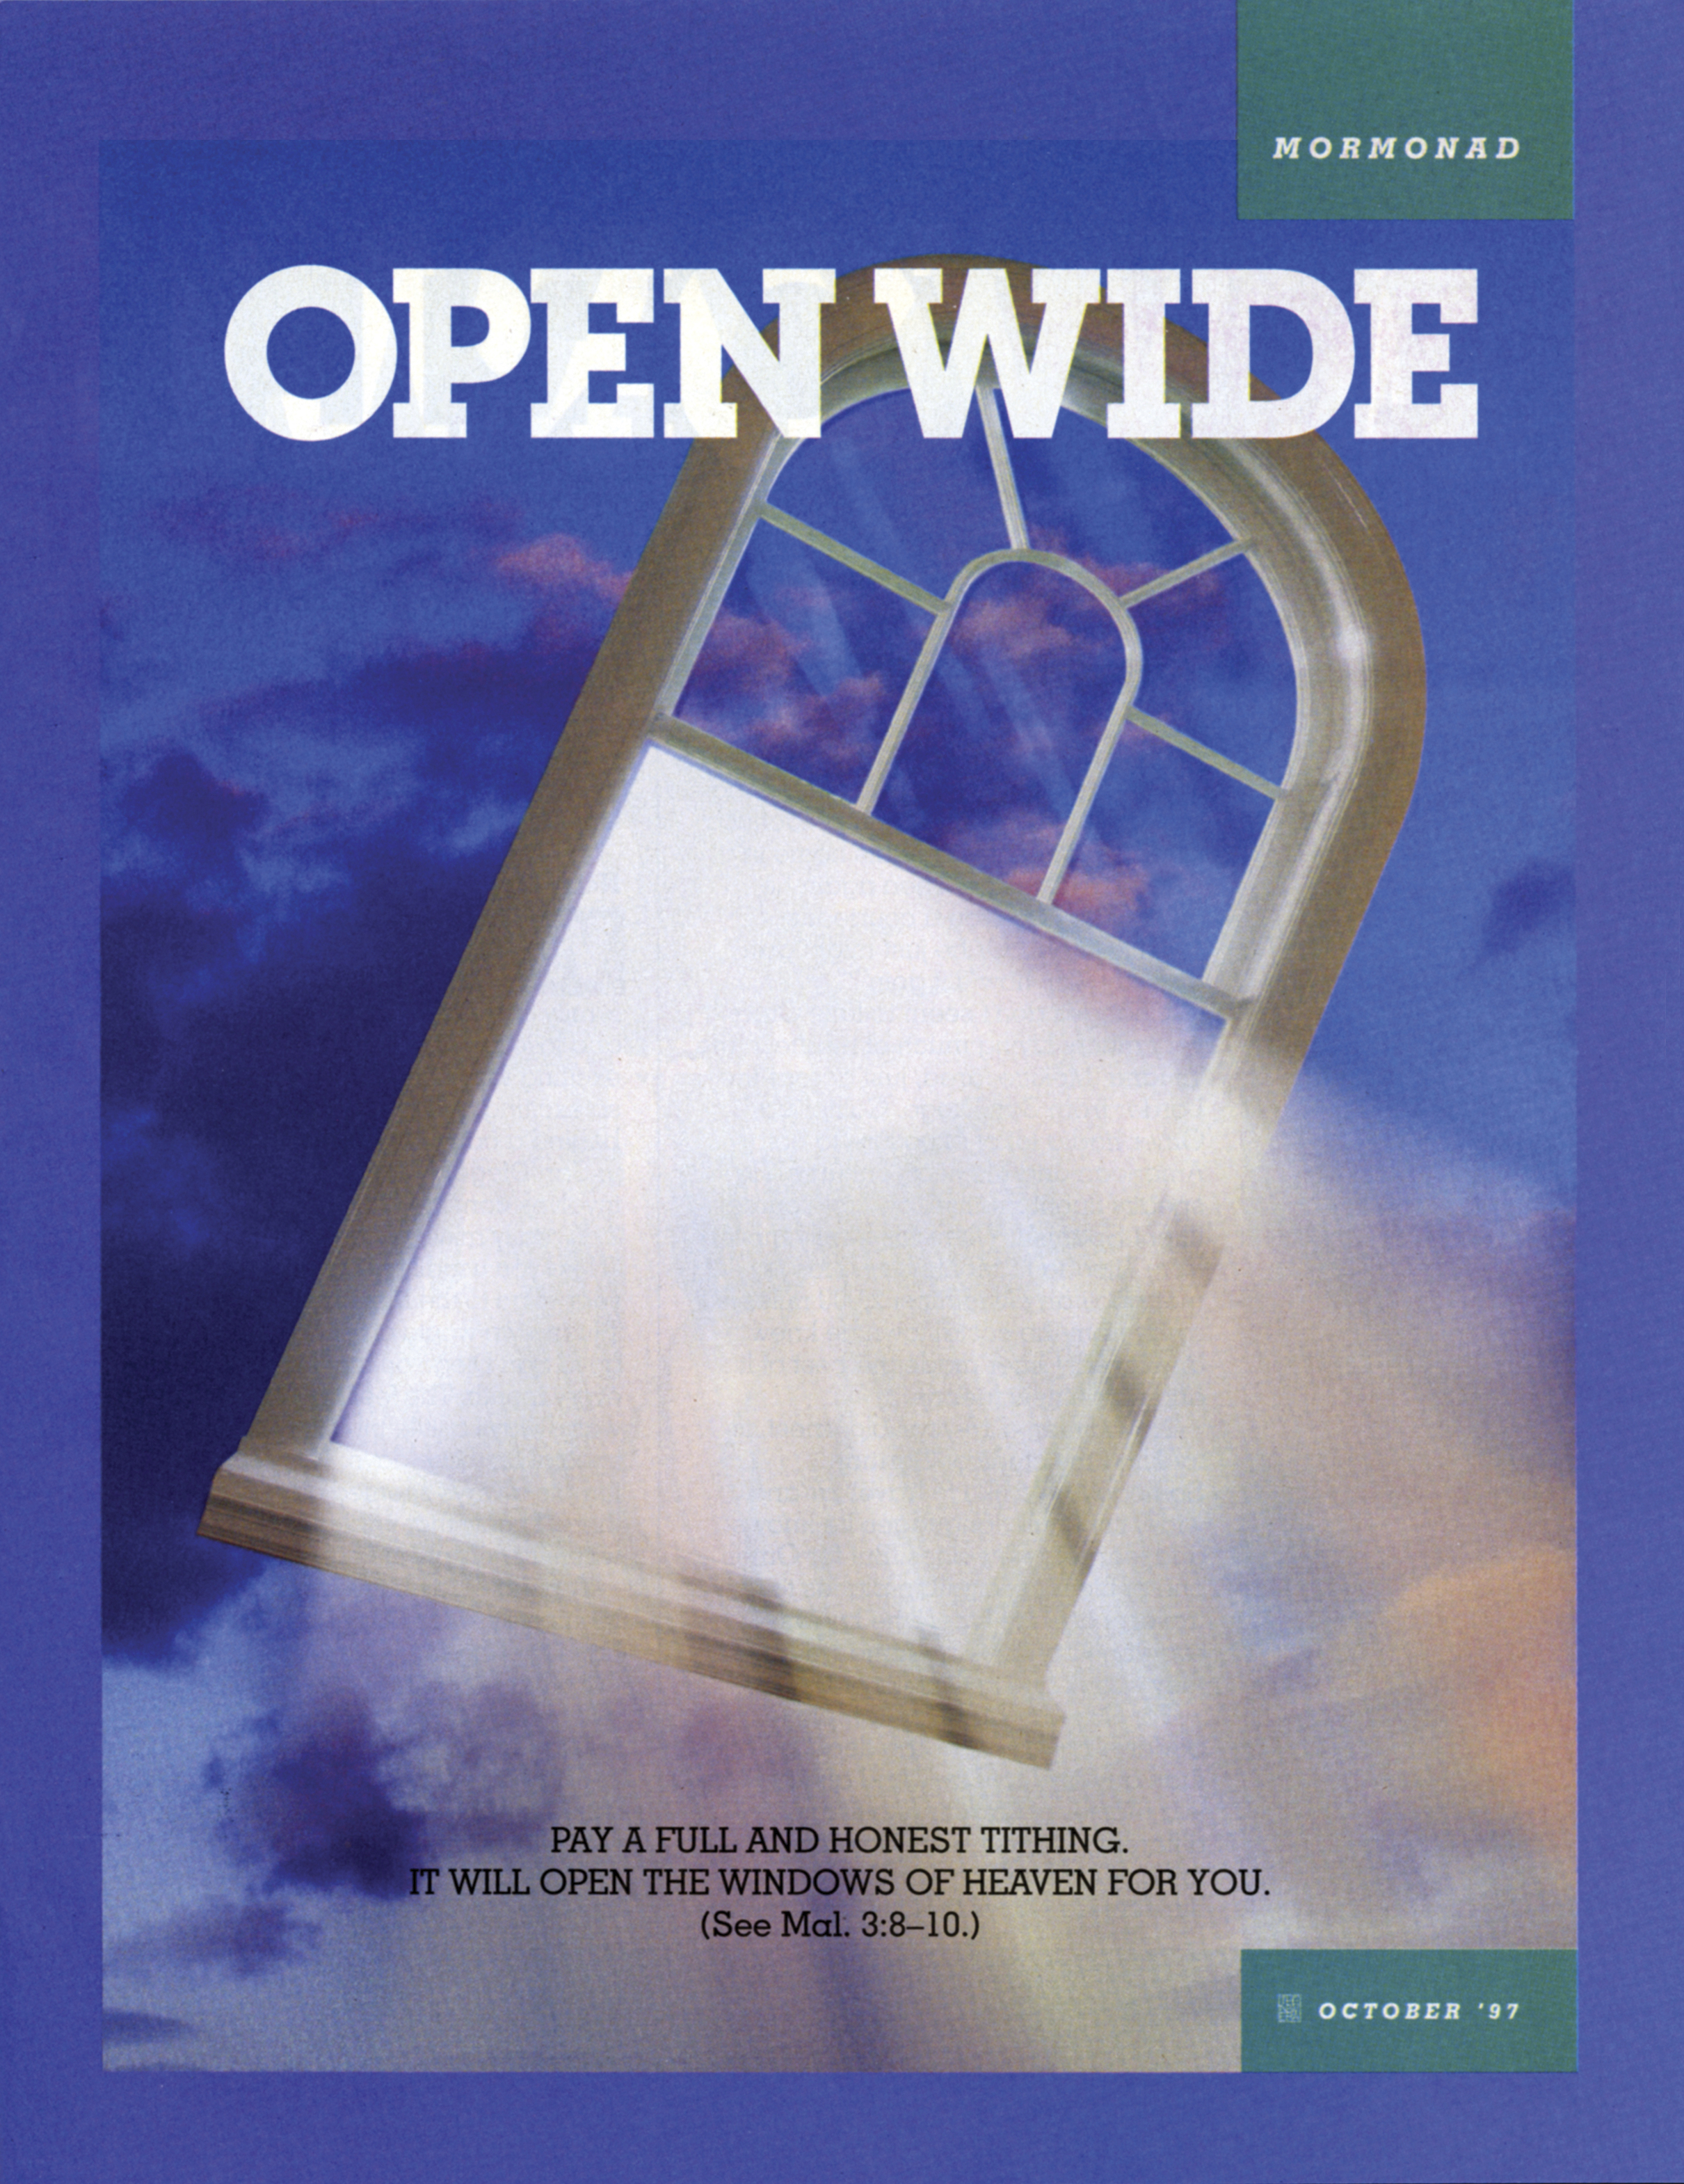 Open Wide. Pay a full and honest tithing. It will open the windows of heaven for you. (See Mal. 3:8–10.) Oct. 1997 © undefined ipCode 1.